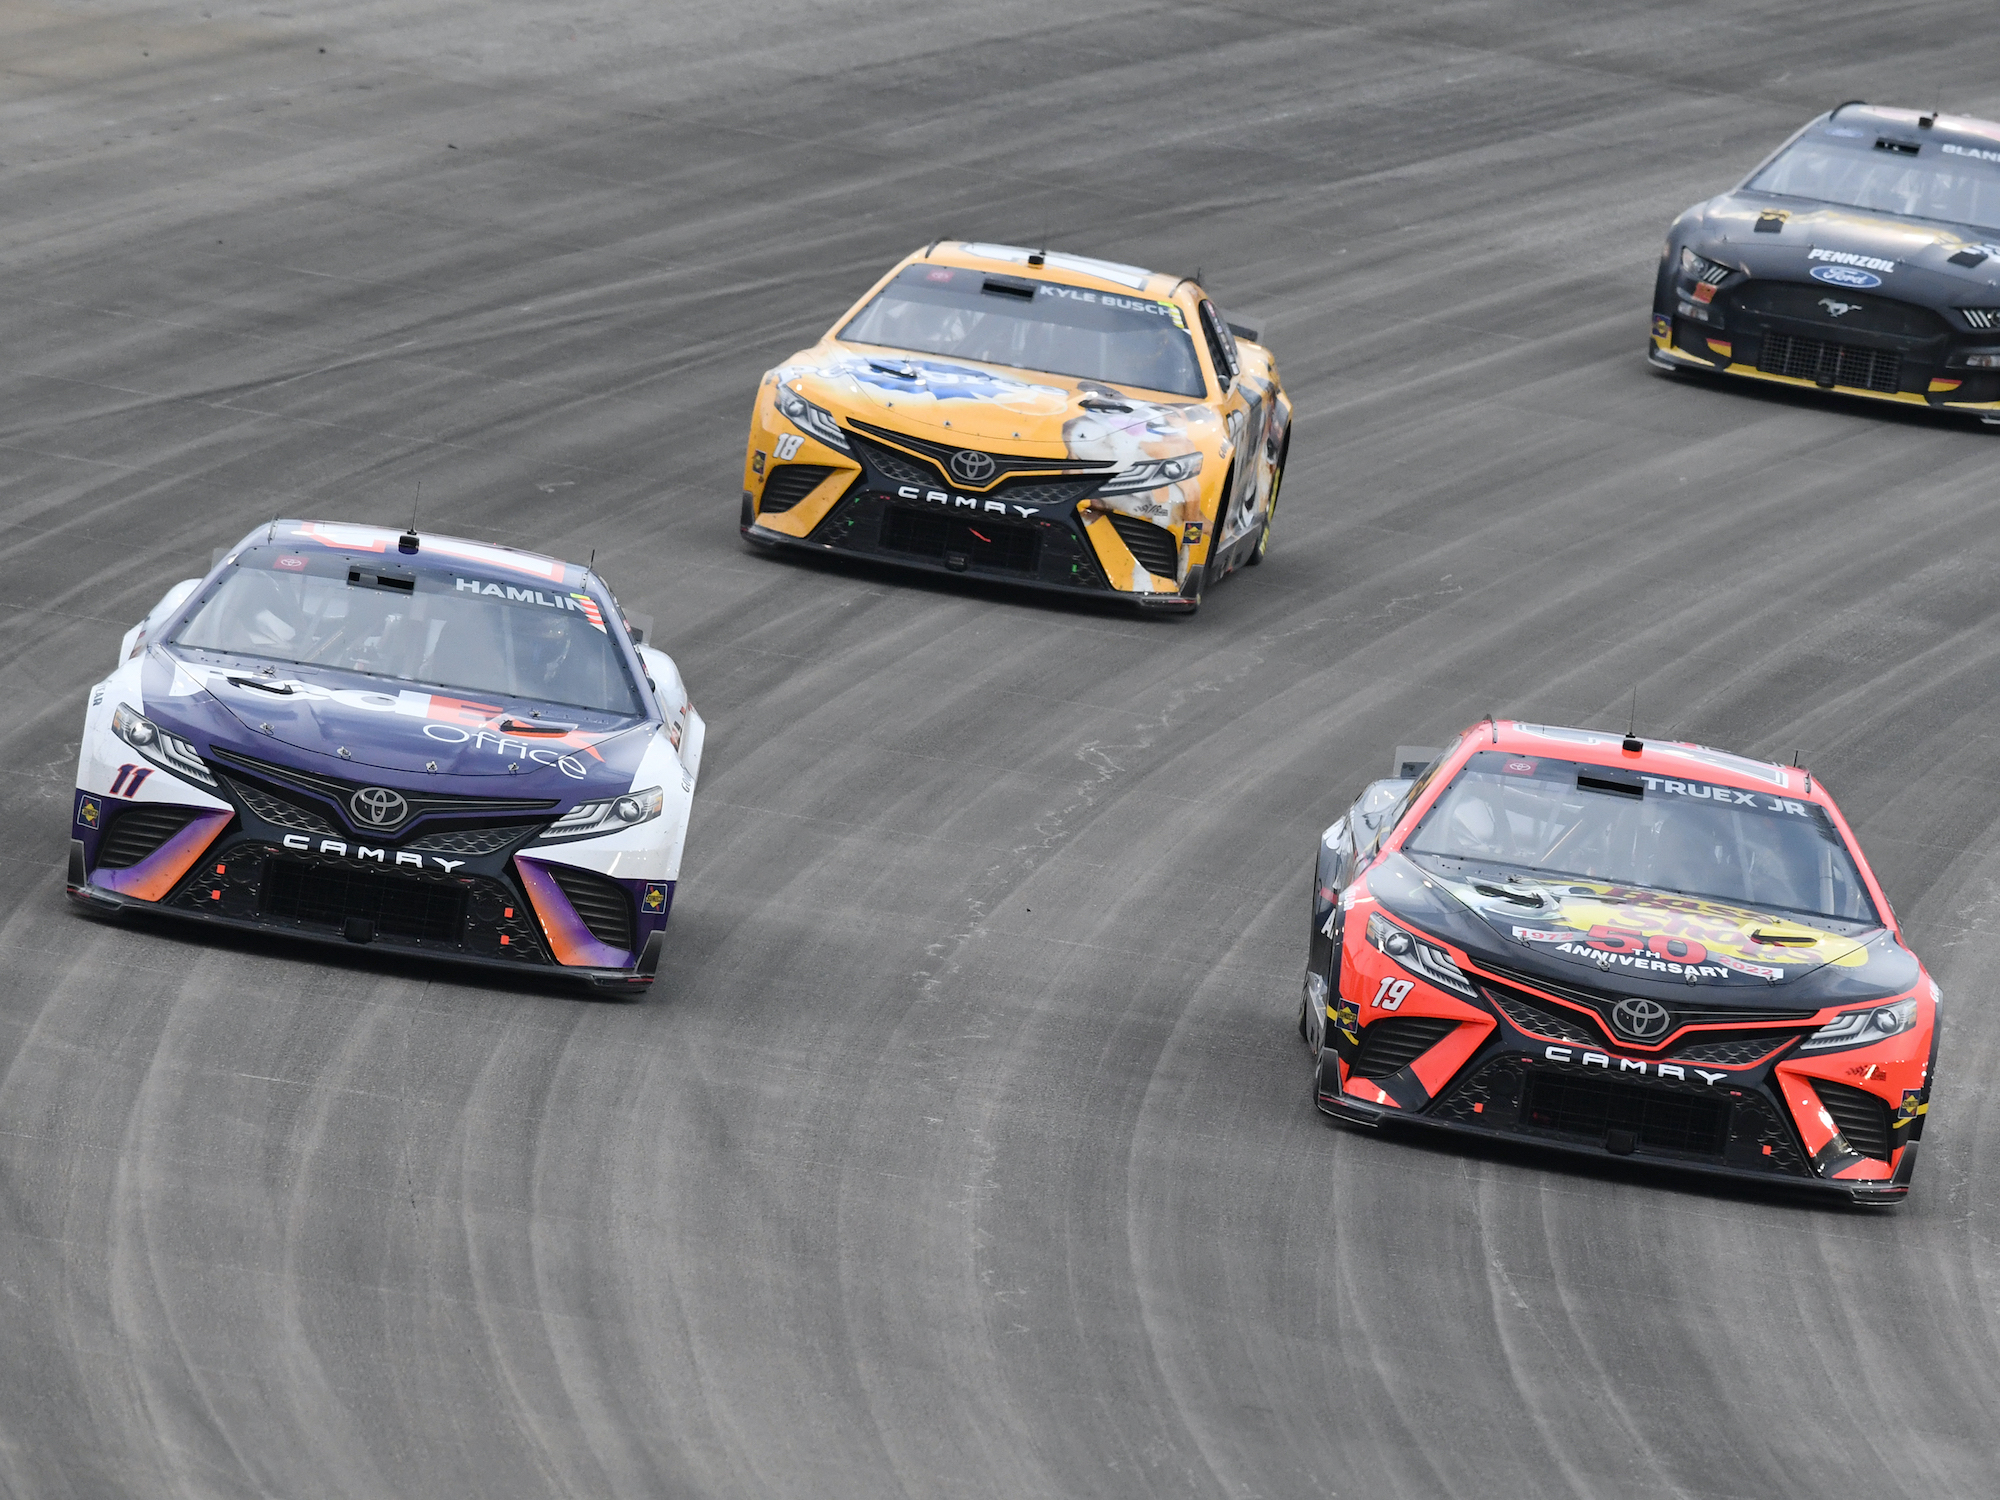 Denny Hamlin and Joe Gibbs Racing Have Major Weakness Exposed Again at Road America and Doesn’t Bode Well for Second Half of Season